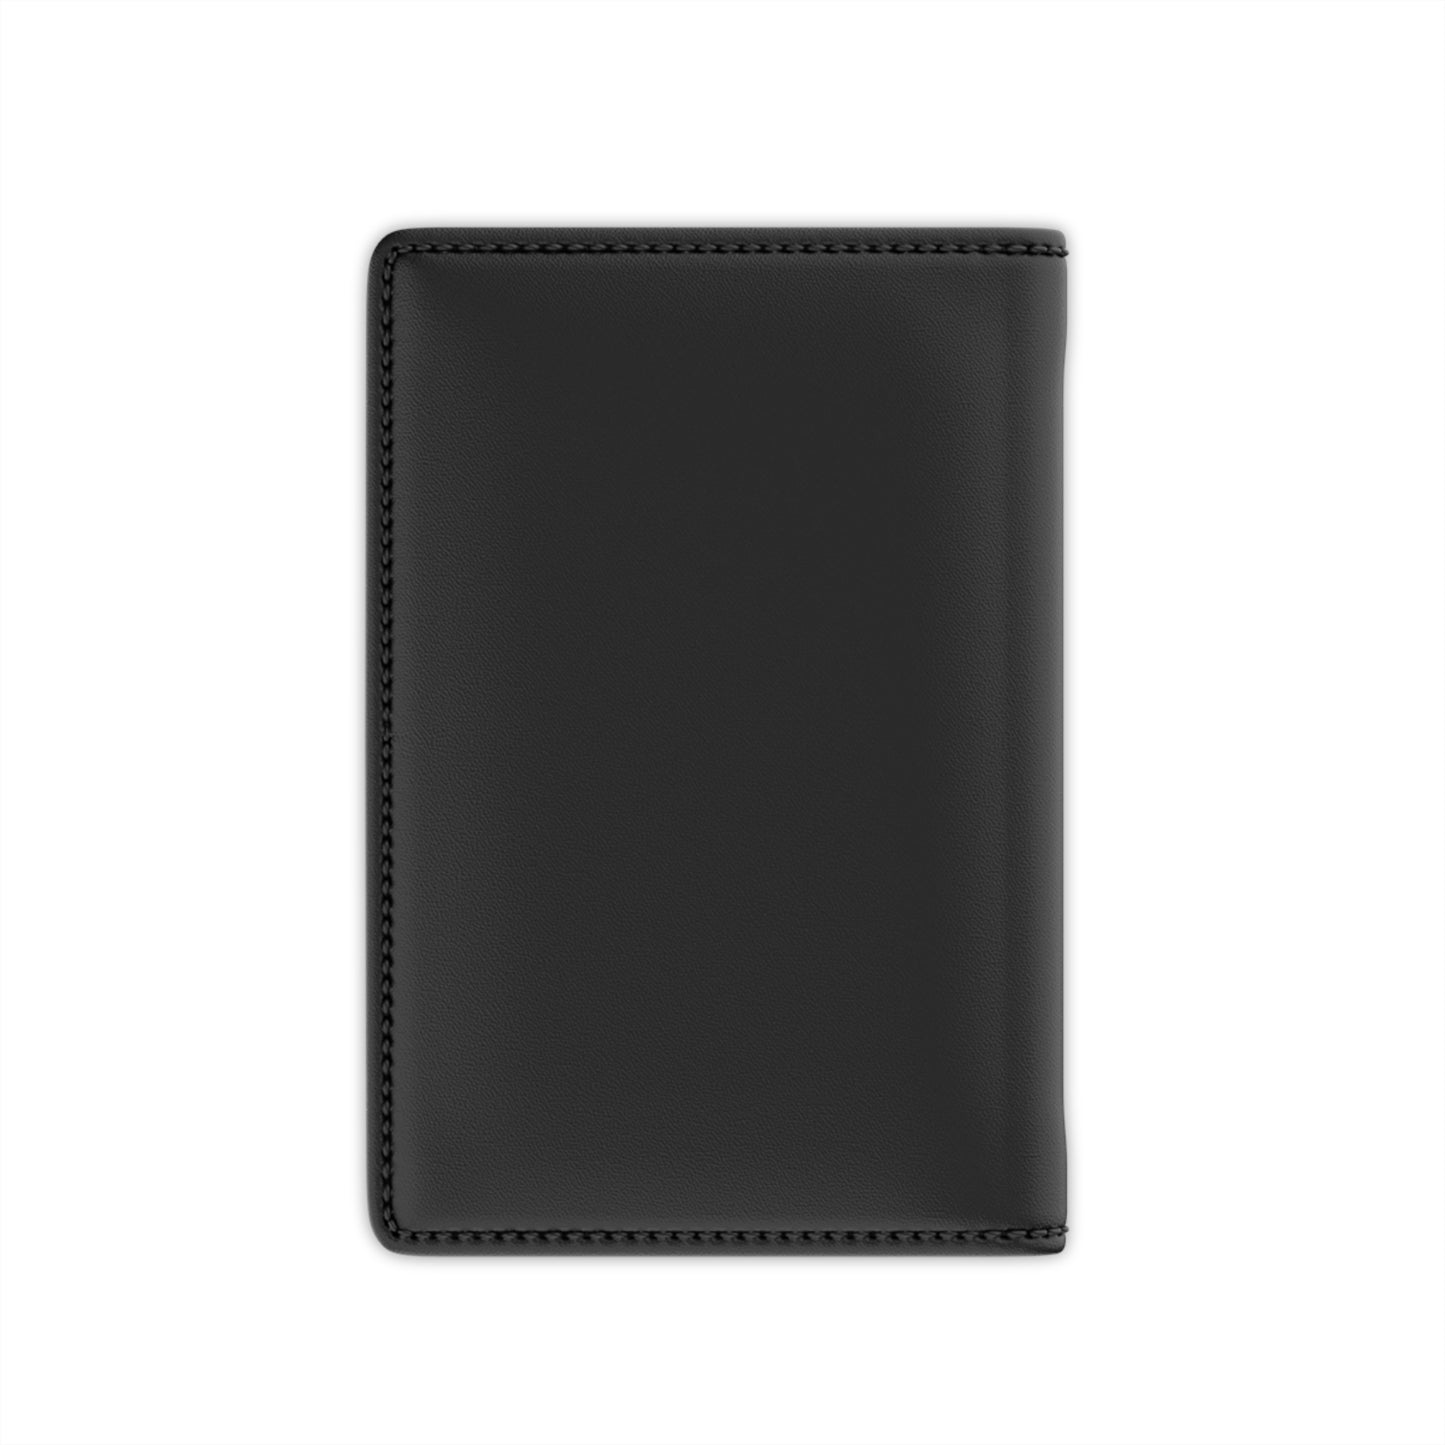 PIXELS OUTFITTERS PASSPORT COVER